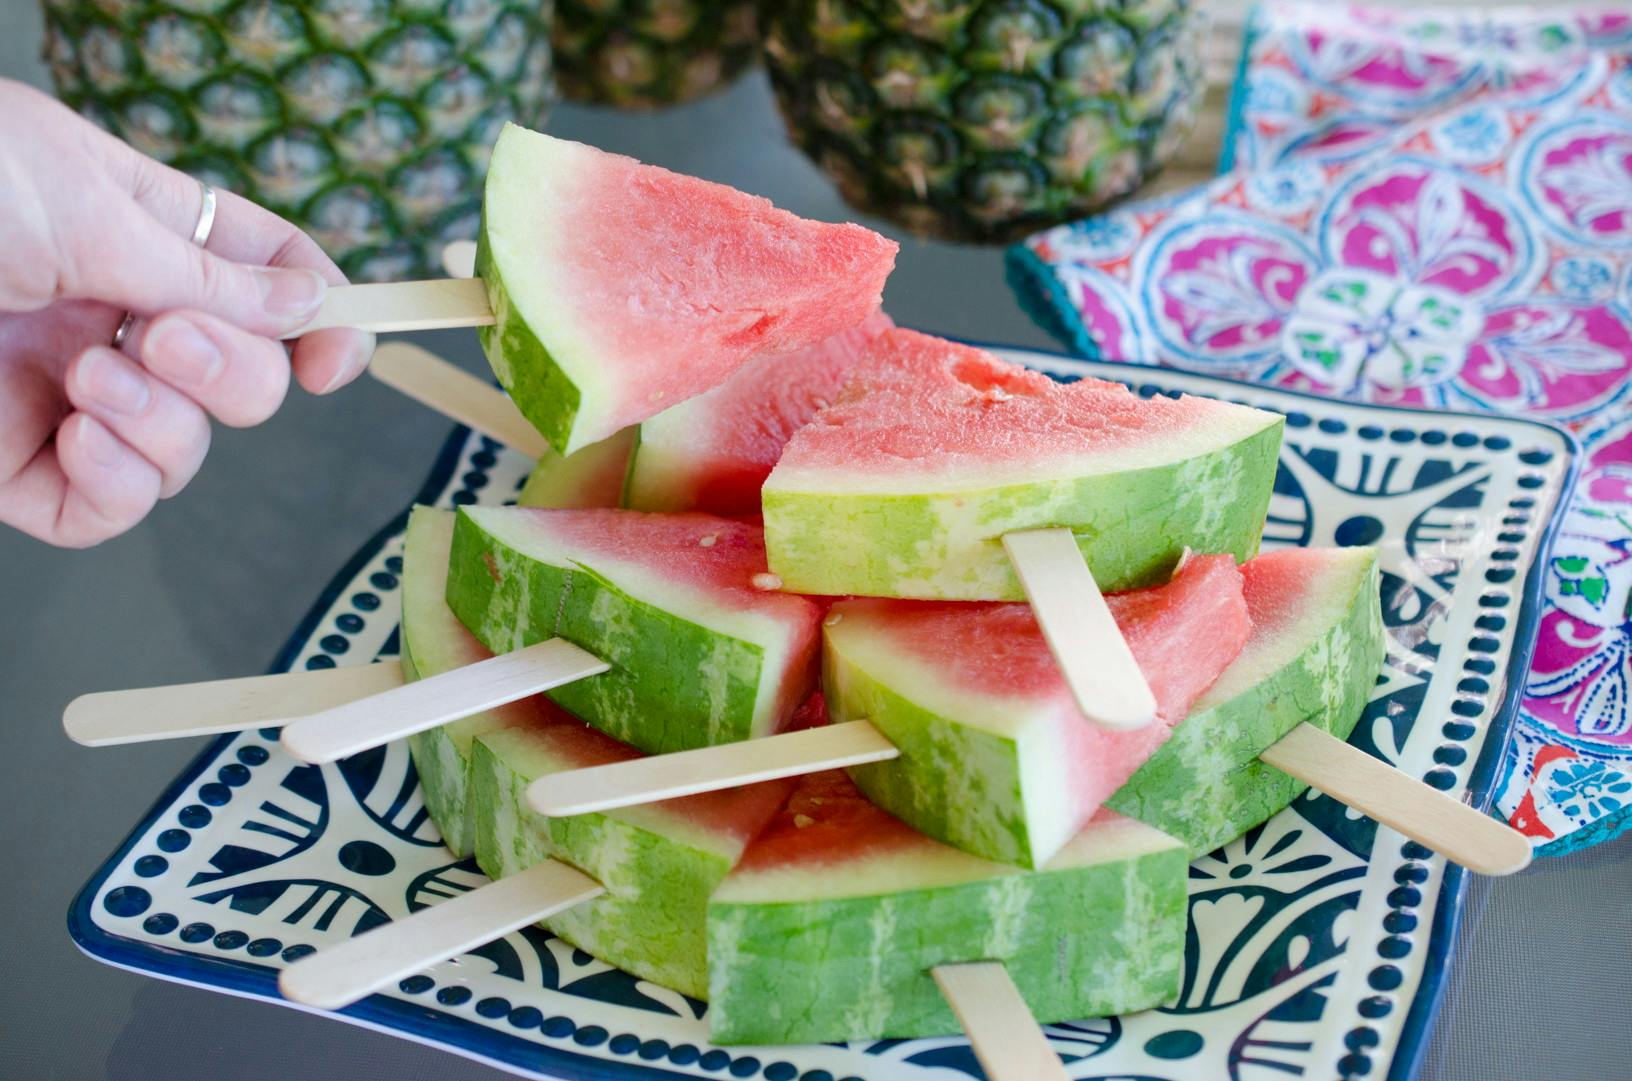 A person picking up a watermelon slice with a popsicle stick in it off of a plate of more of the same.